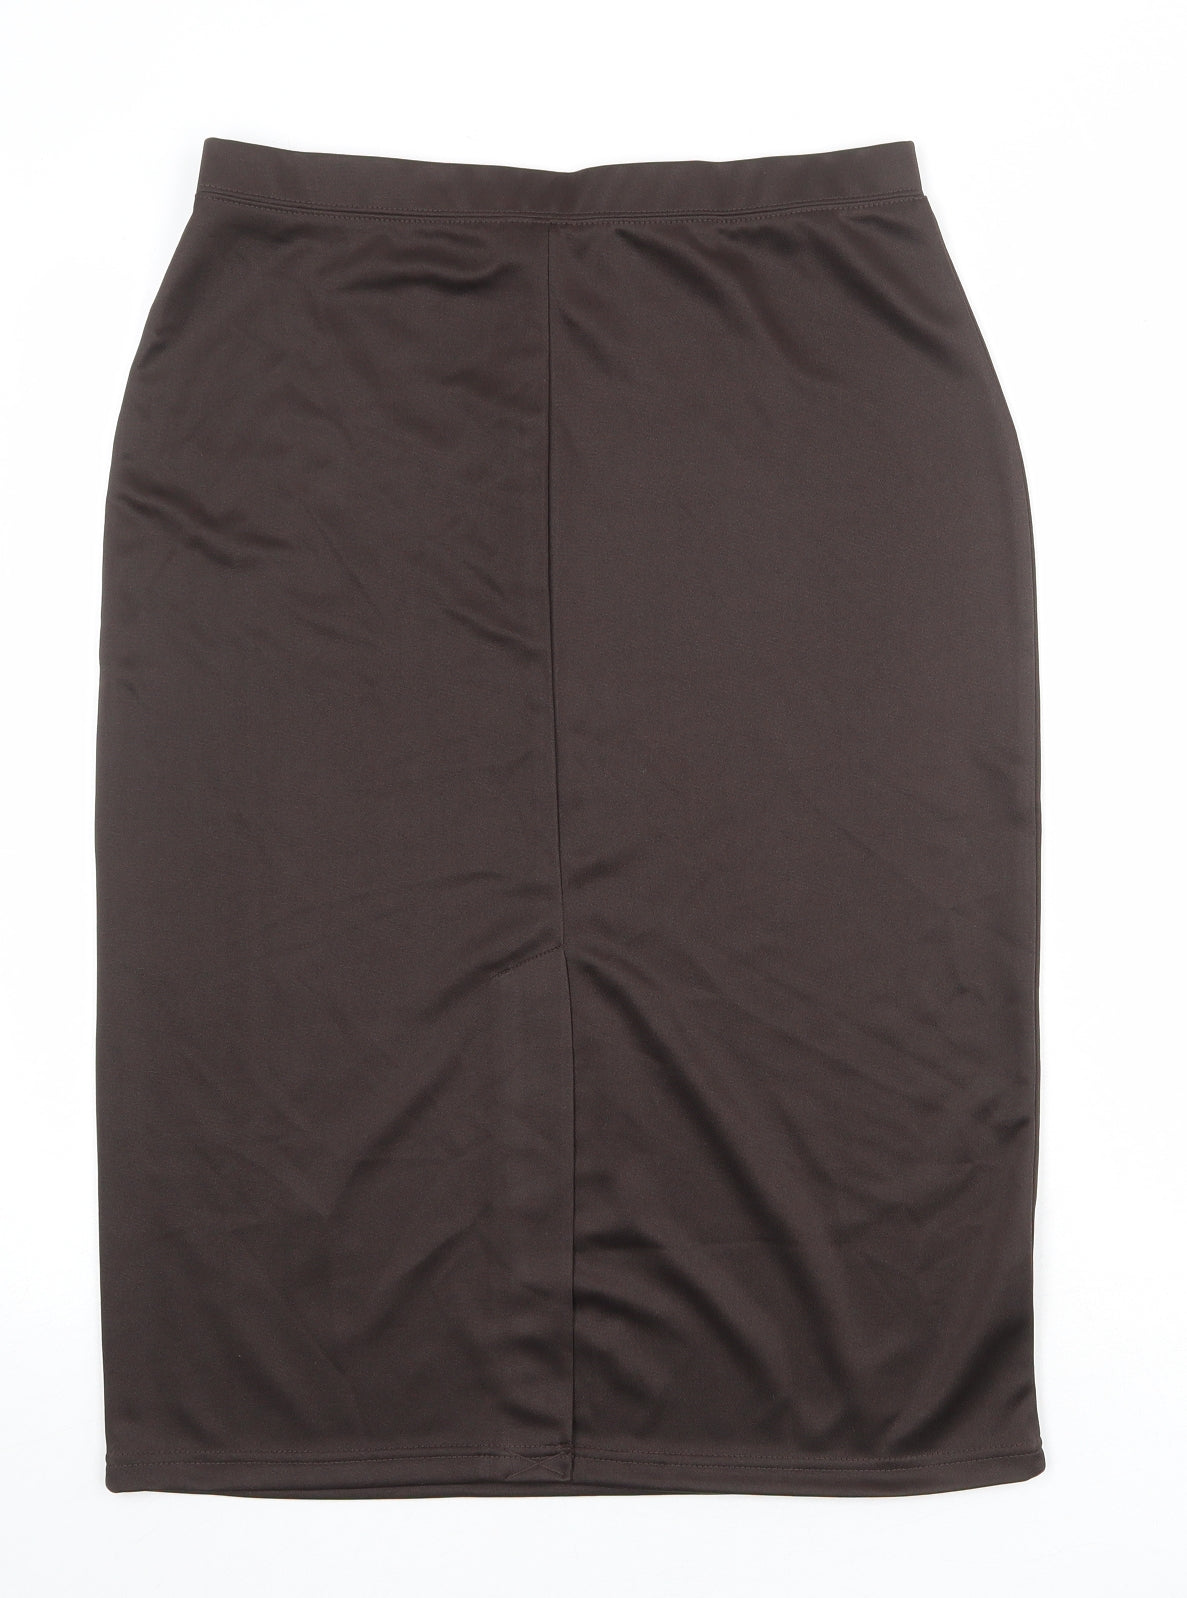 Wardrobe Womens Brown Polyester Straight & Pencil Skirt Size 12